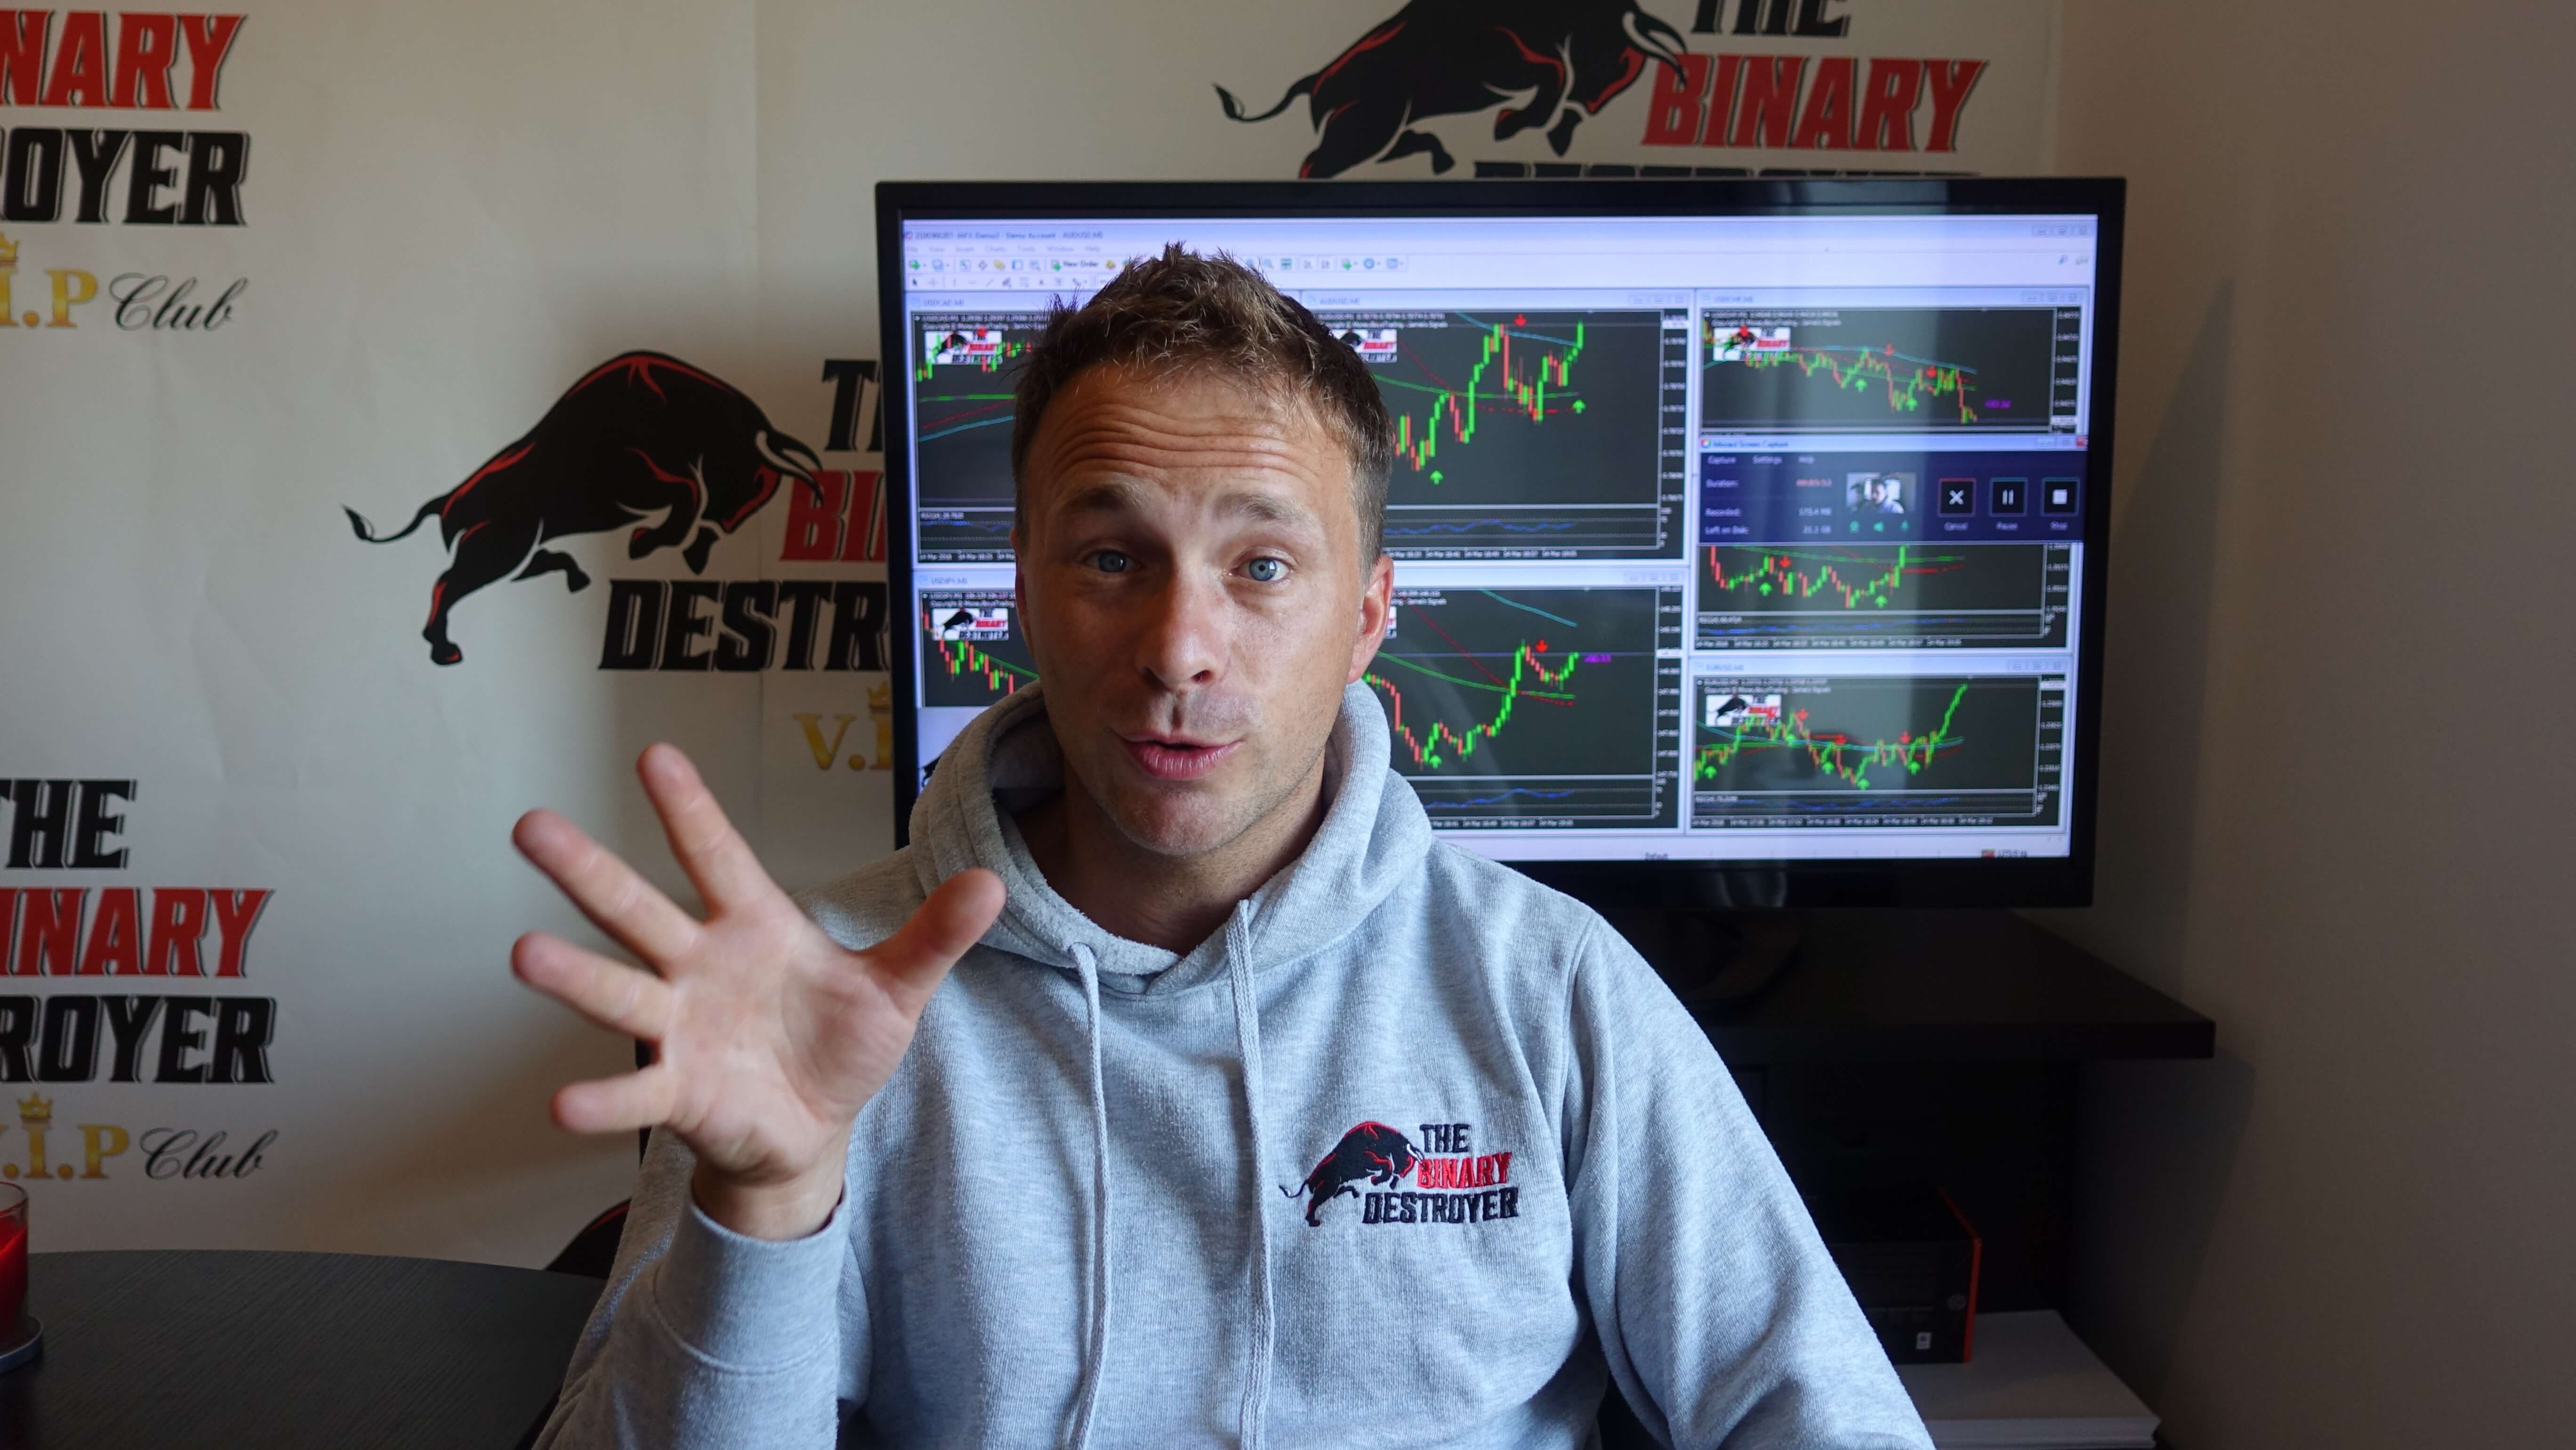 FX Learning The Binary Destroyer Screenshot You Tube Live